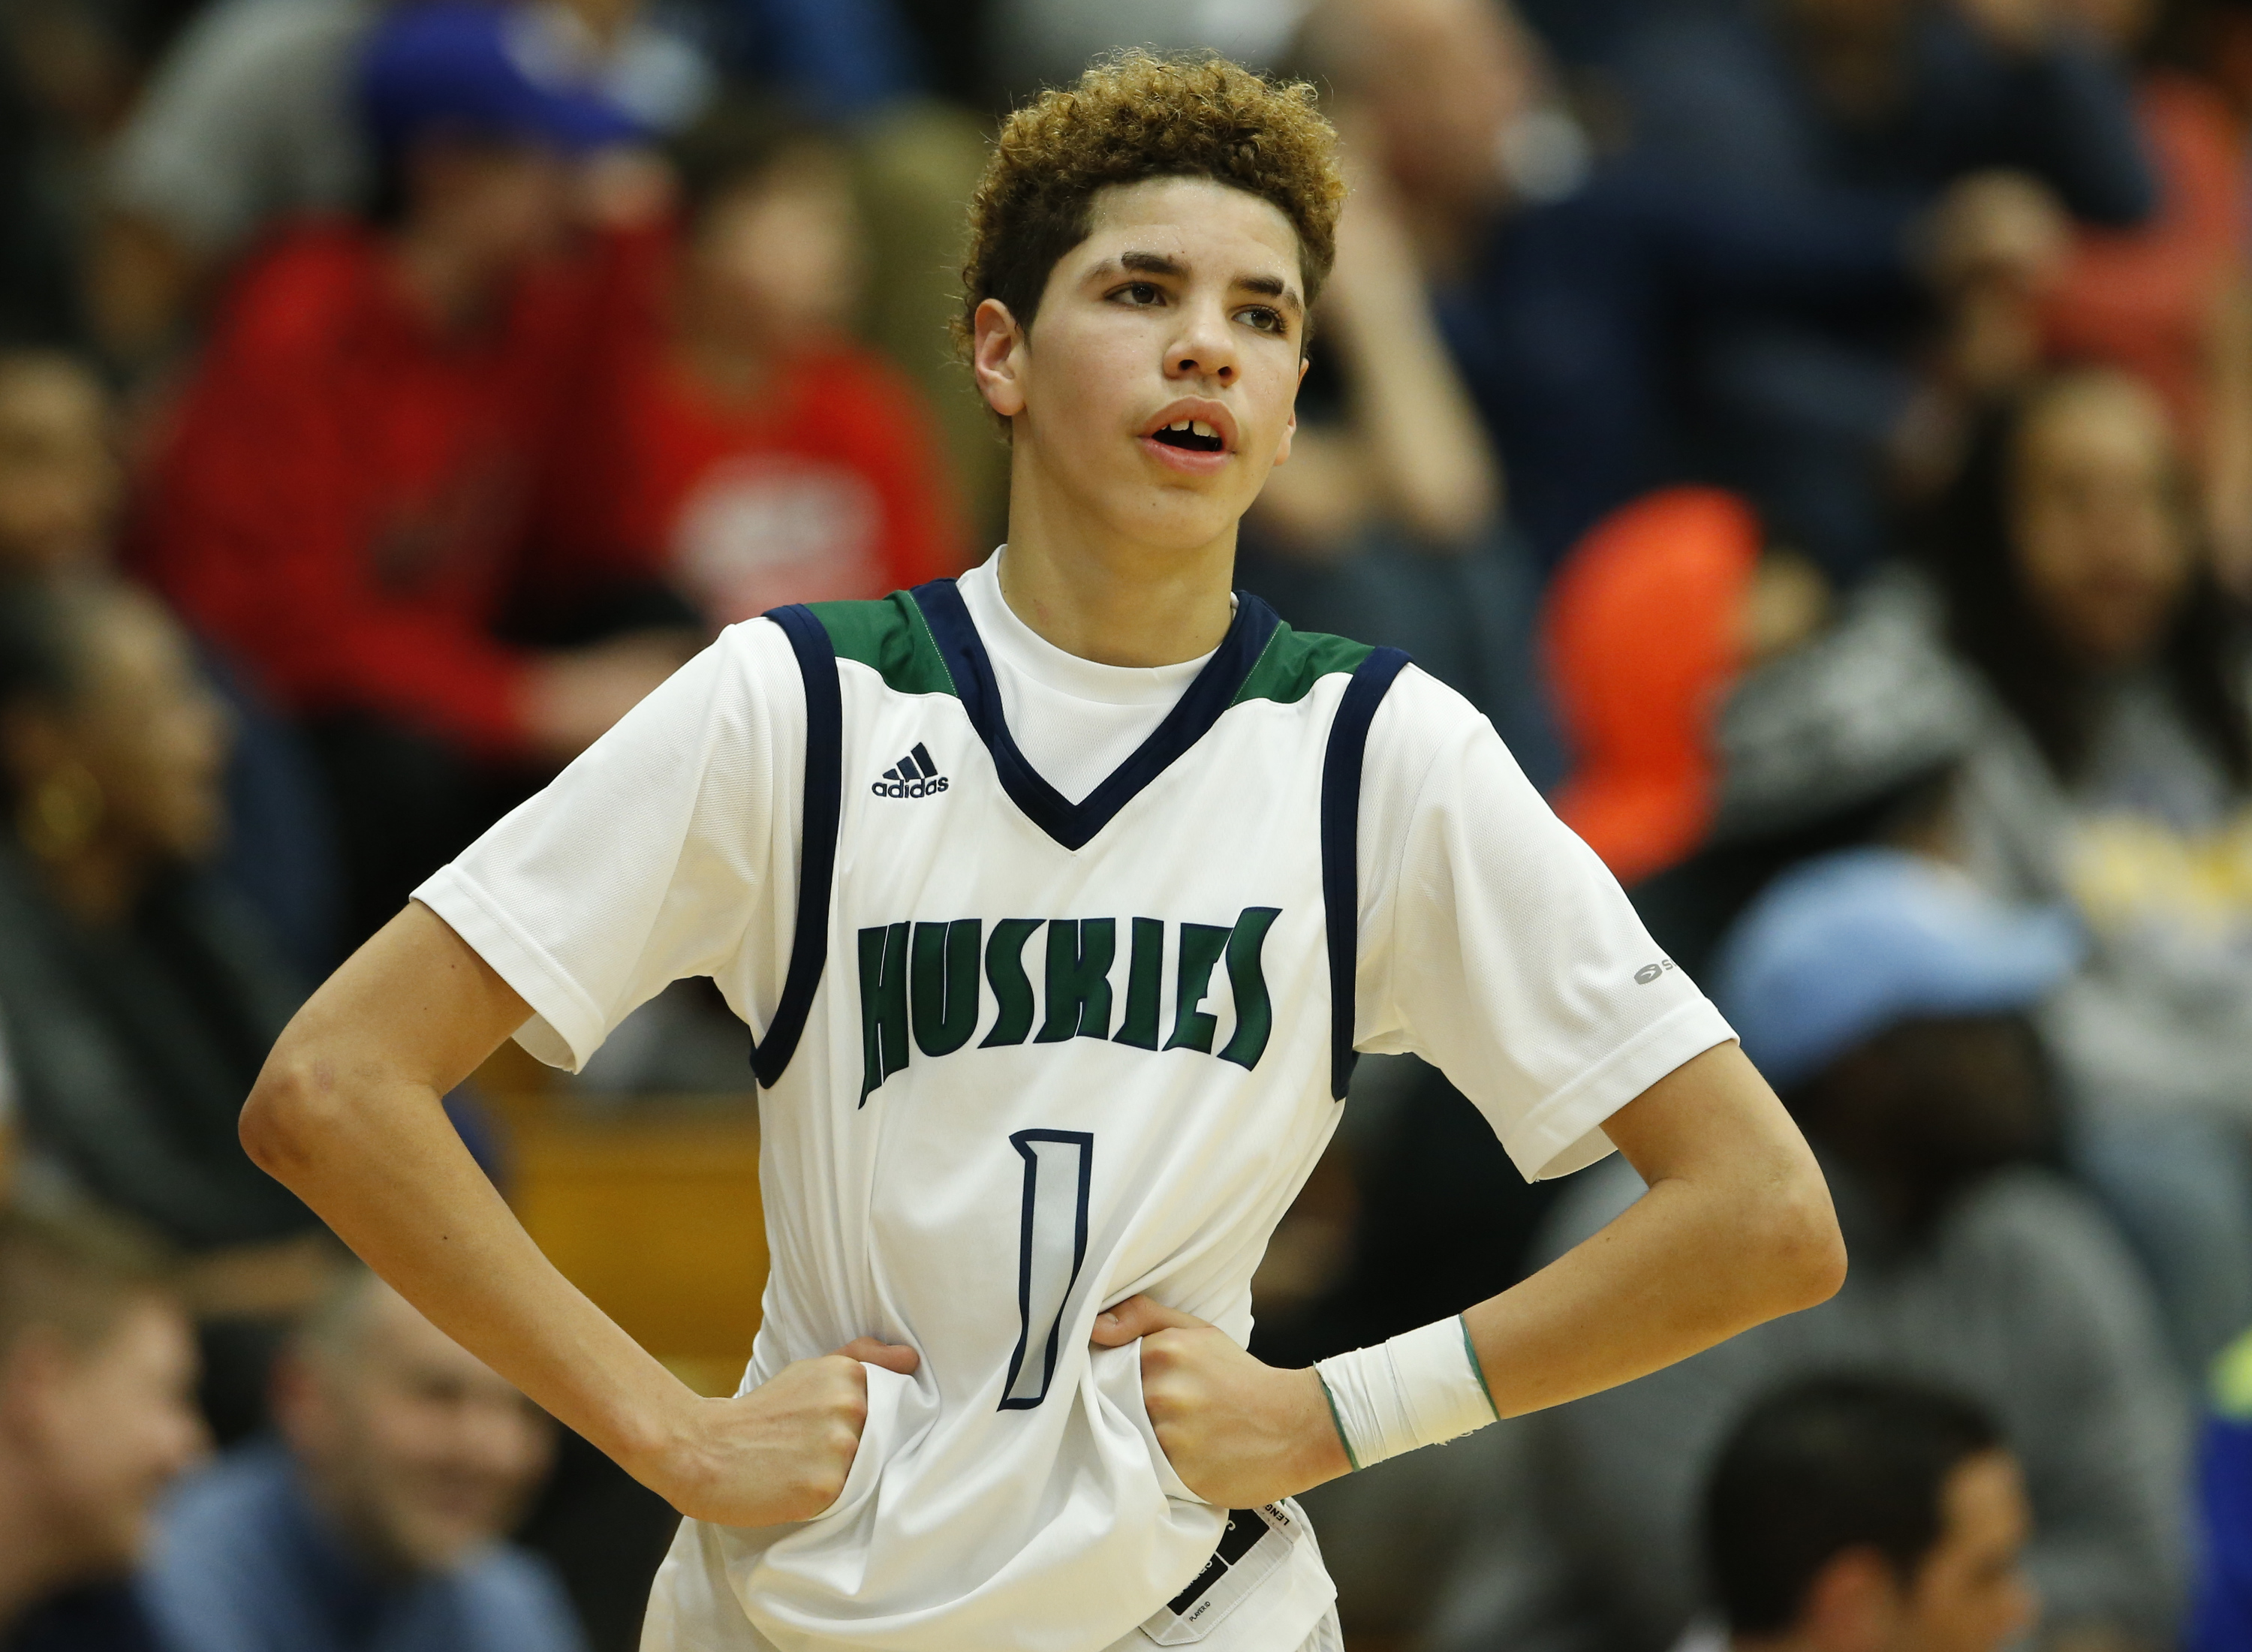 Jan 18, 2016 -- Springfield, MA, U.S.A -- Chino Hills LaMelo Ball (1) on the court against High Point Christian in the second half of the Spalding Hoophall Classic at Blake Arena in Springfield, Mass. Chino Hills defeated High Point Christian 100-75. -- Photo by David Butler II-USA Today Sports Images ORG XMIT: US 134344 Spalding Hoophal 1/17/2016 [Via MerlinFTP Drop]